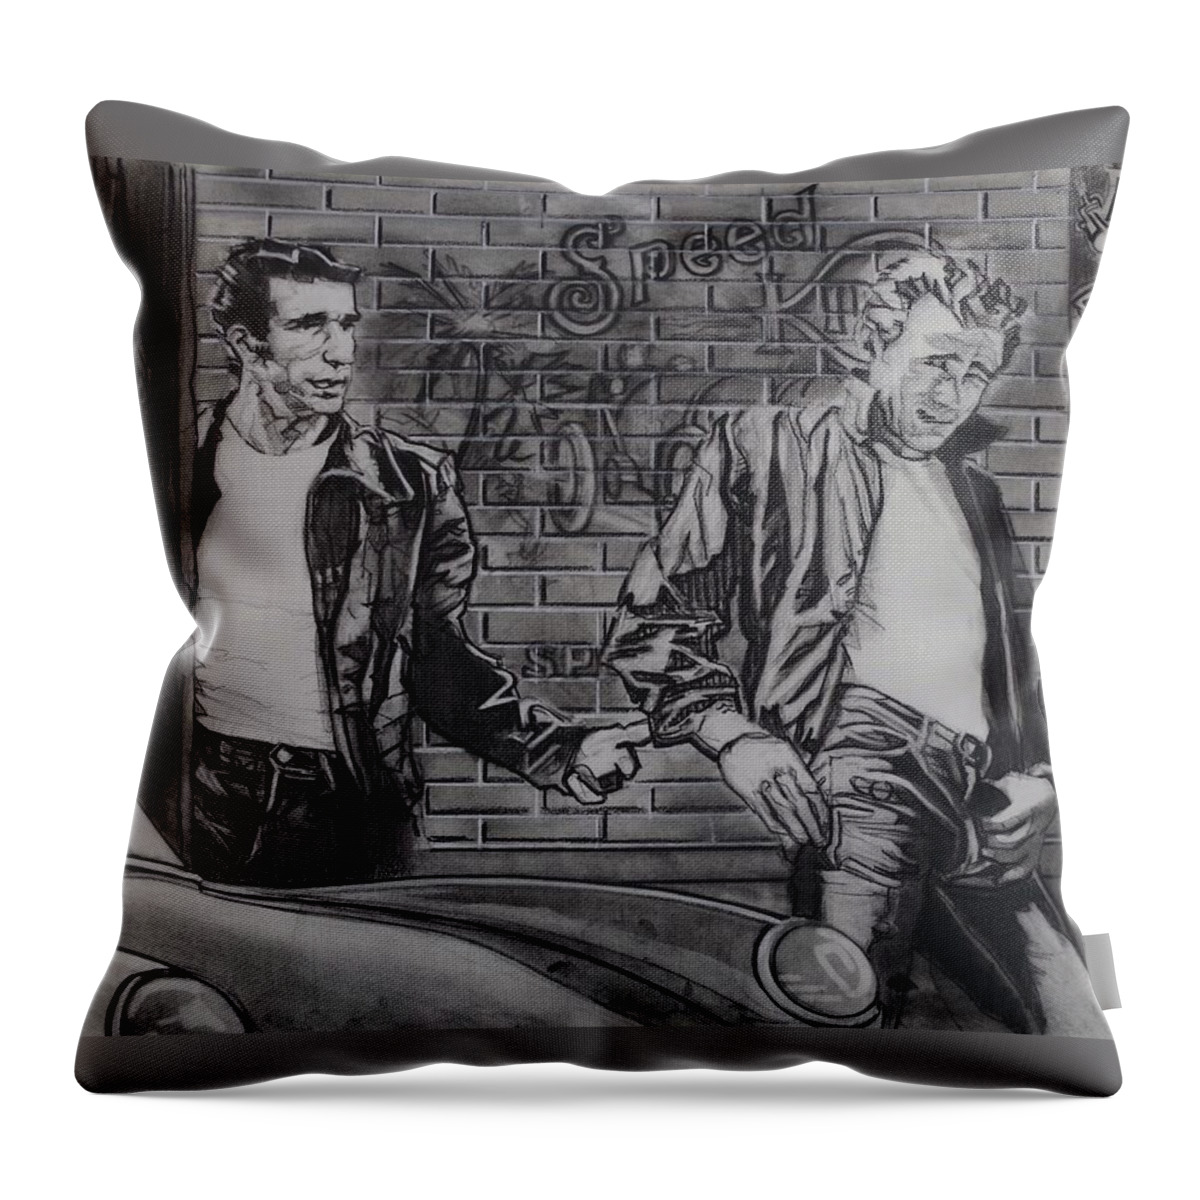 Charcoal Pencil On Paper Throw Pillow featuring the drawing James Dean Meets The Fonz by Sean Connolly